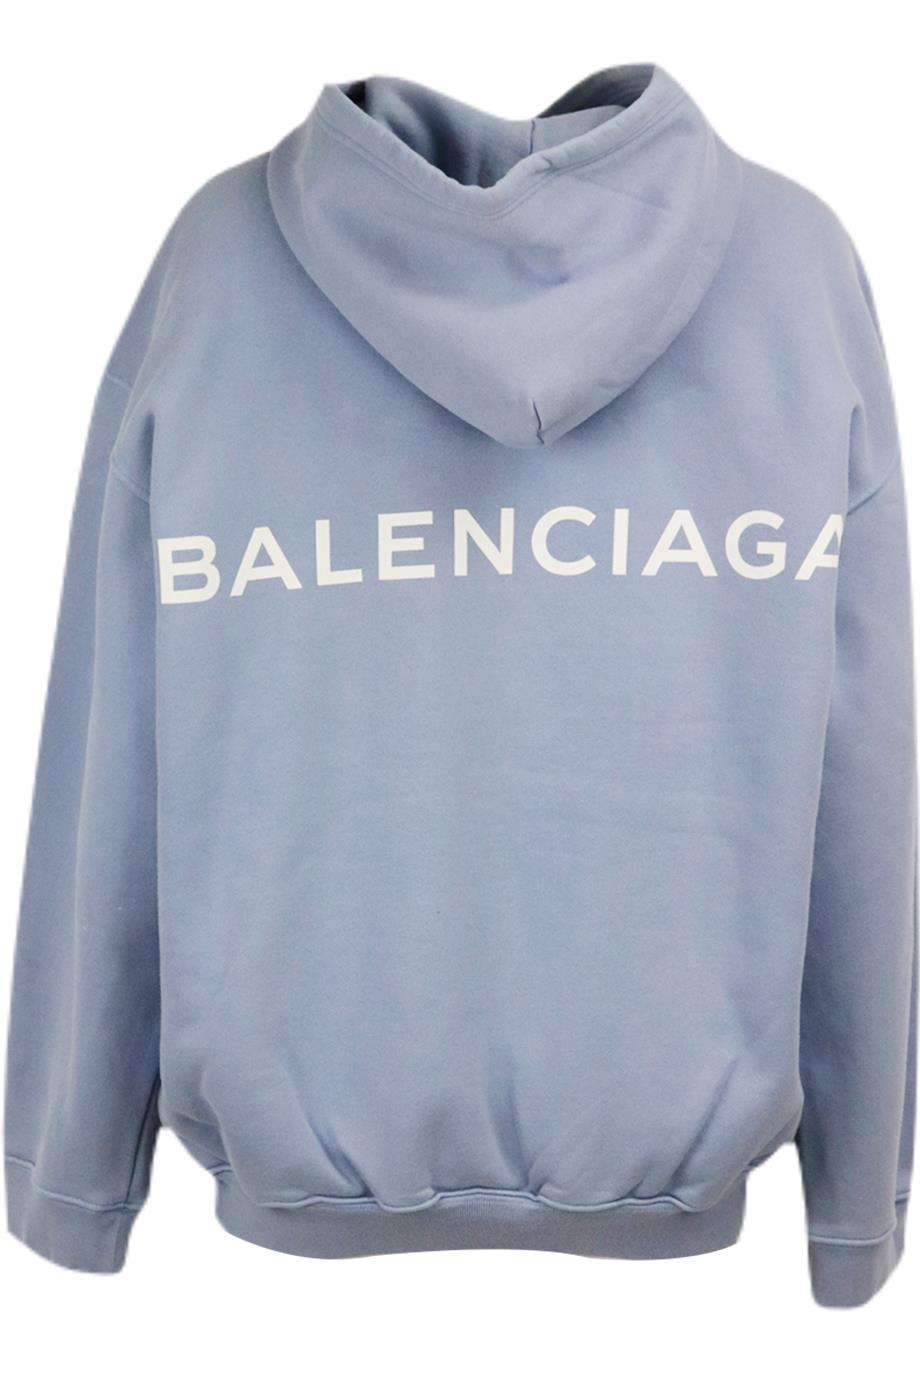 Balenciaga Baby Blue Campaign Hoodie Luxury Apparel on Carousell